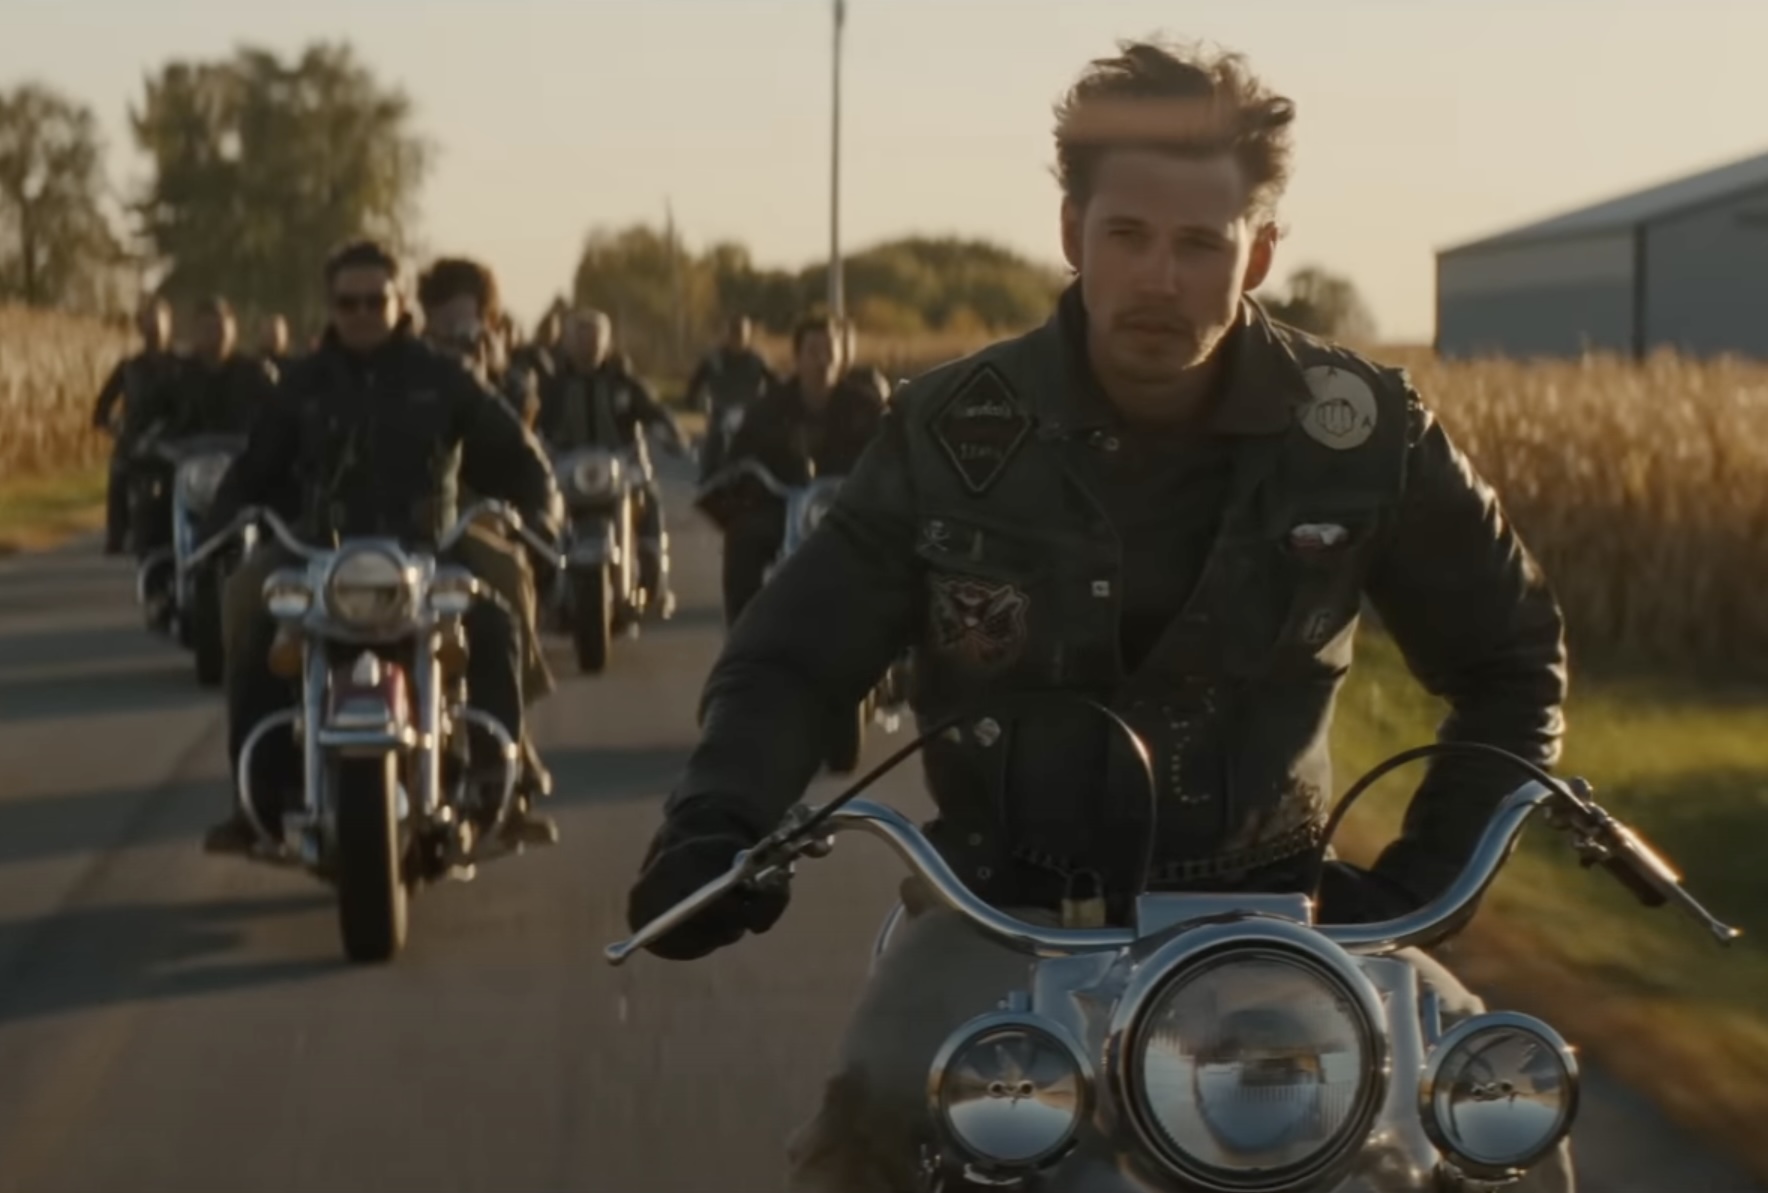 “The Bikeriders” has a premiere date in Poland!  Austin Butler and Tom Hardy are together in the Motorcycle Club